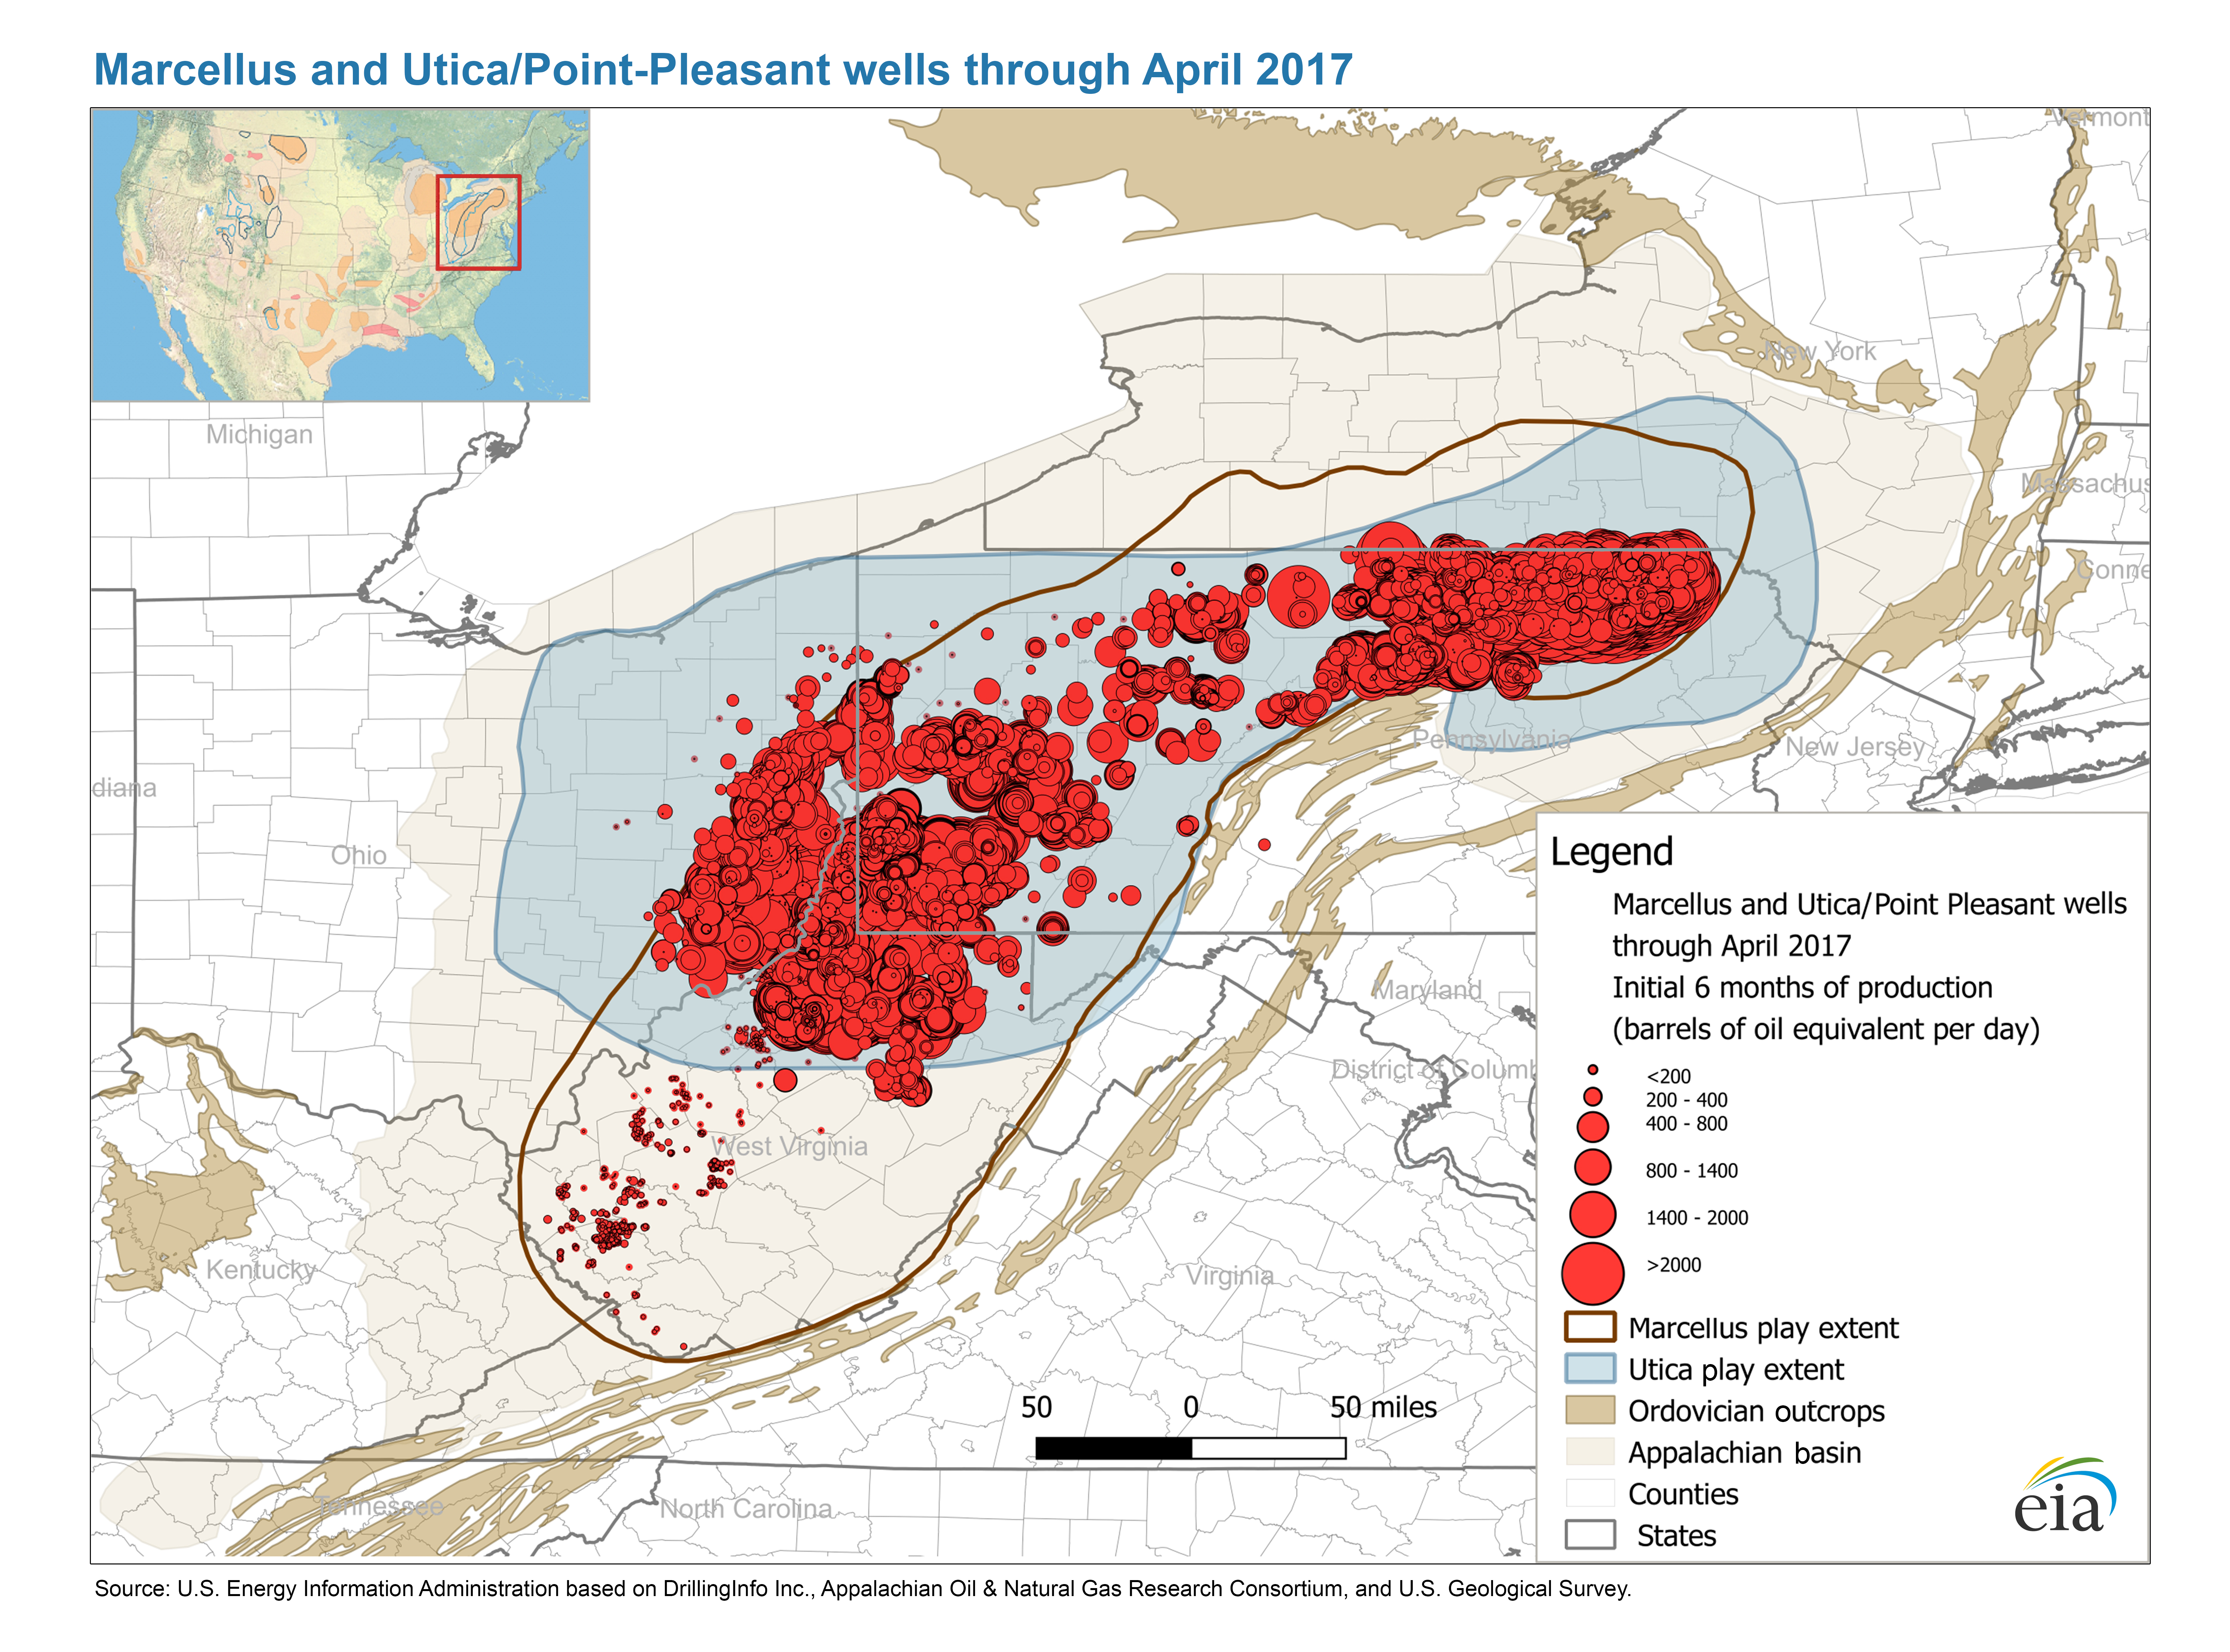 Map of wells in the Marcellus and Utica/Point Pleasant formations (Pennsylvania, Ohio, and West Virginia) through April 2017.